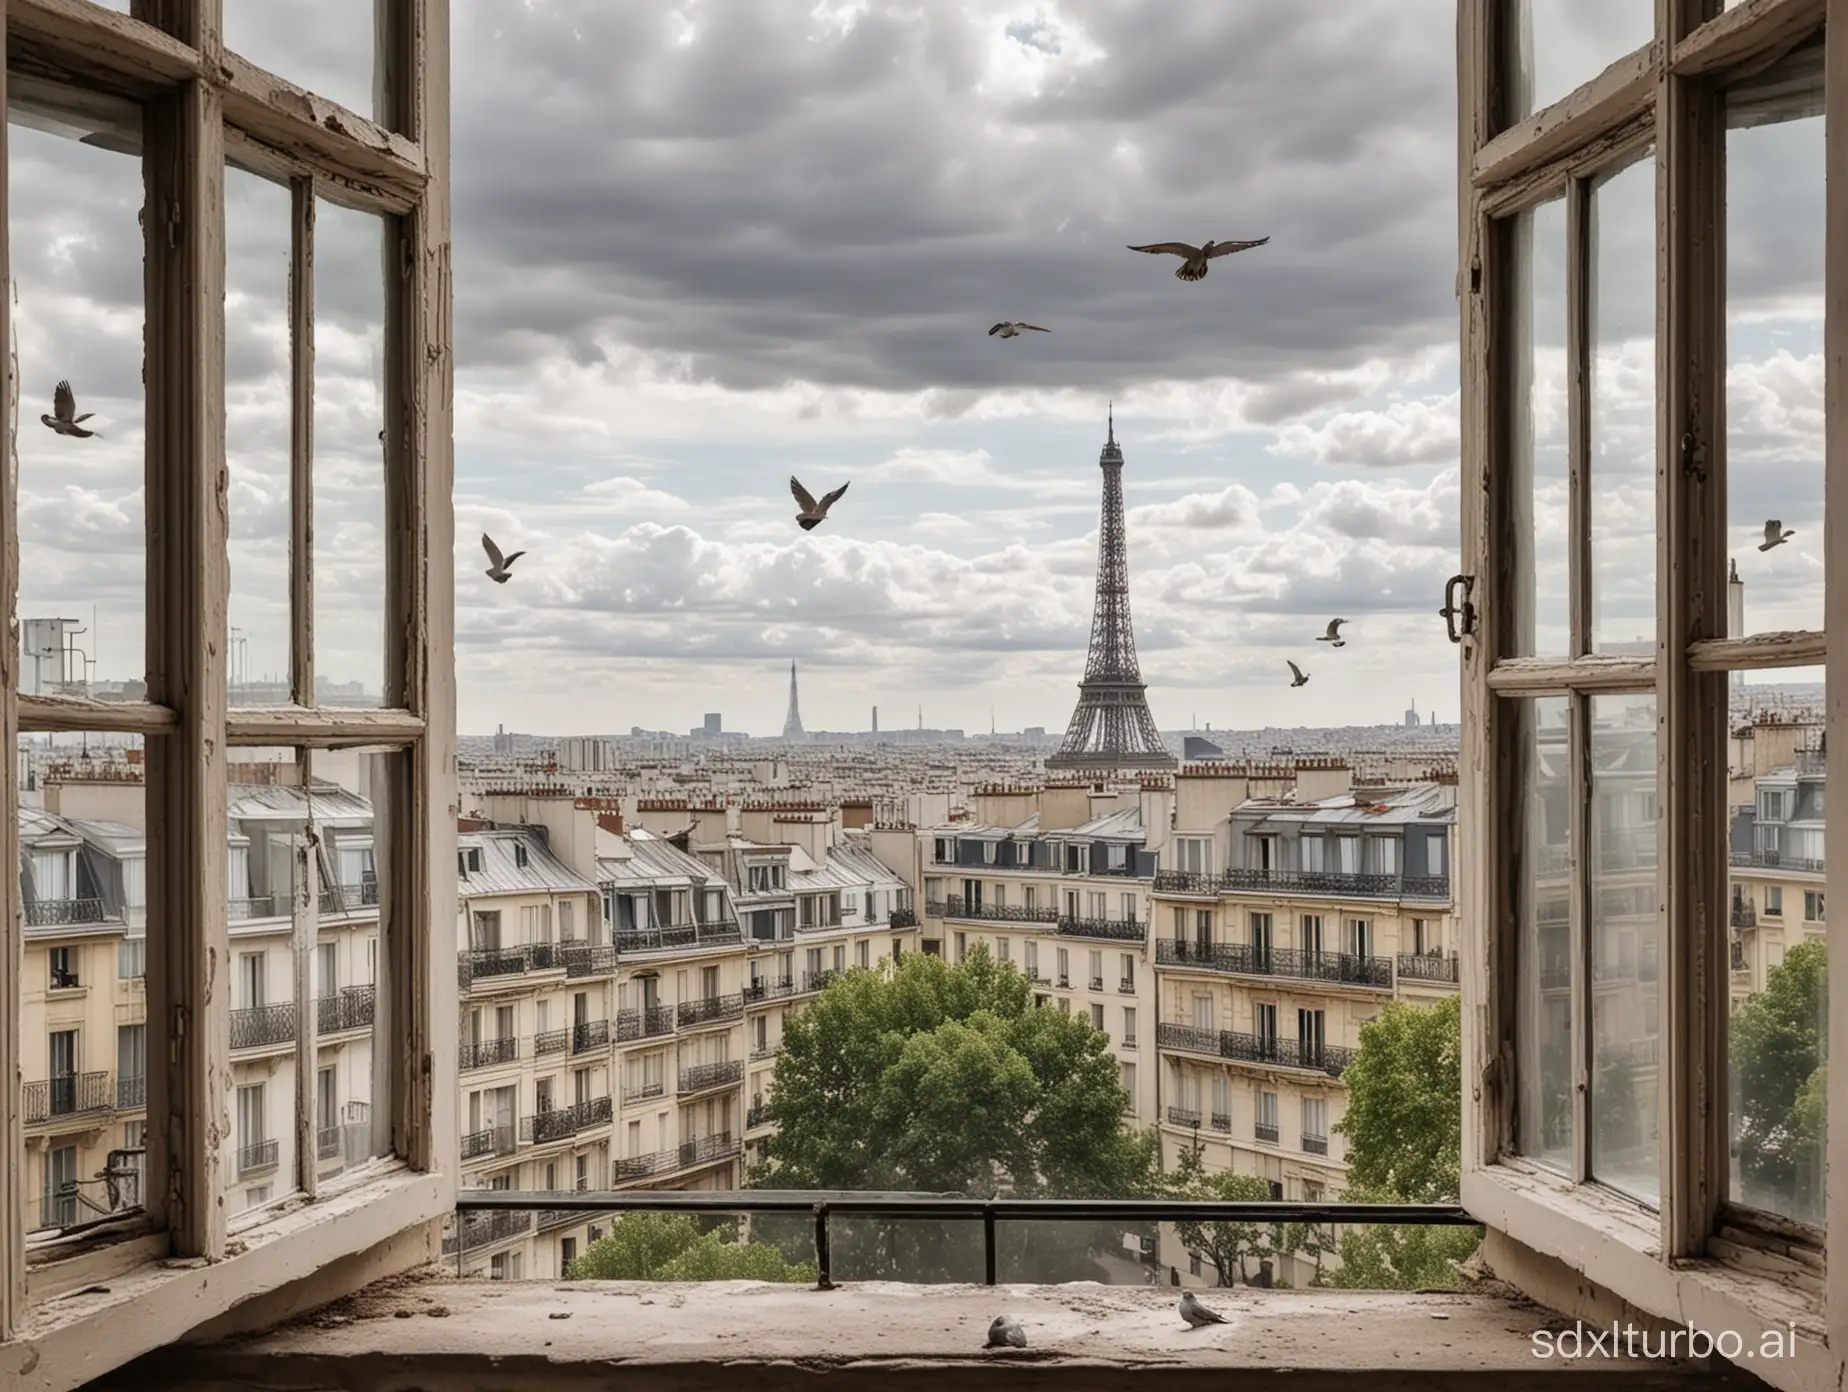 Sunny-Parisian-Rooftops-View-with-Eiffel-Tower-and-Pigeons